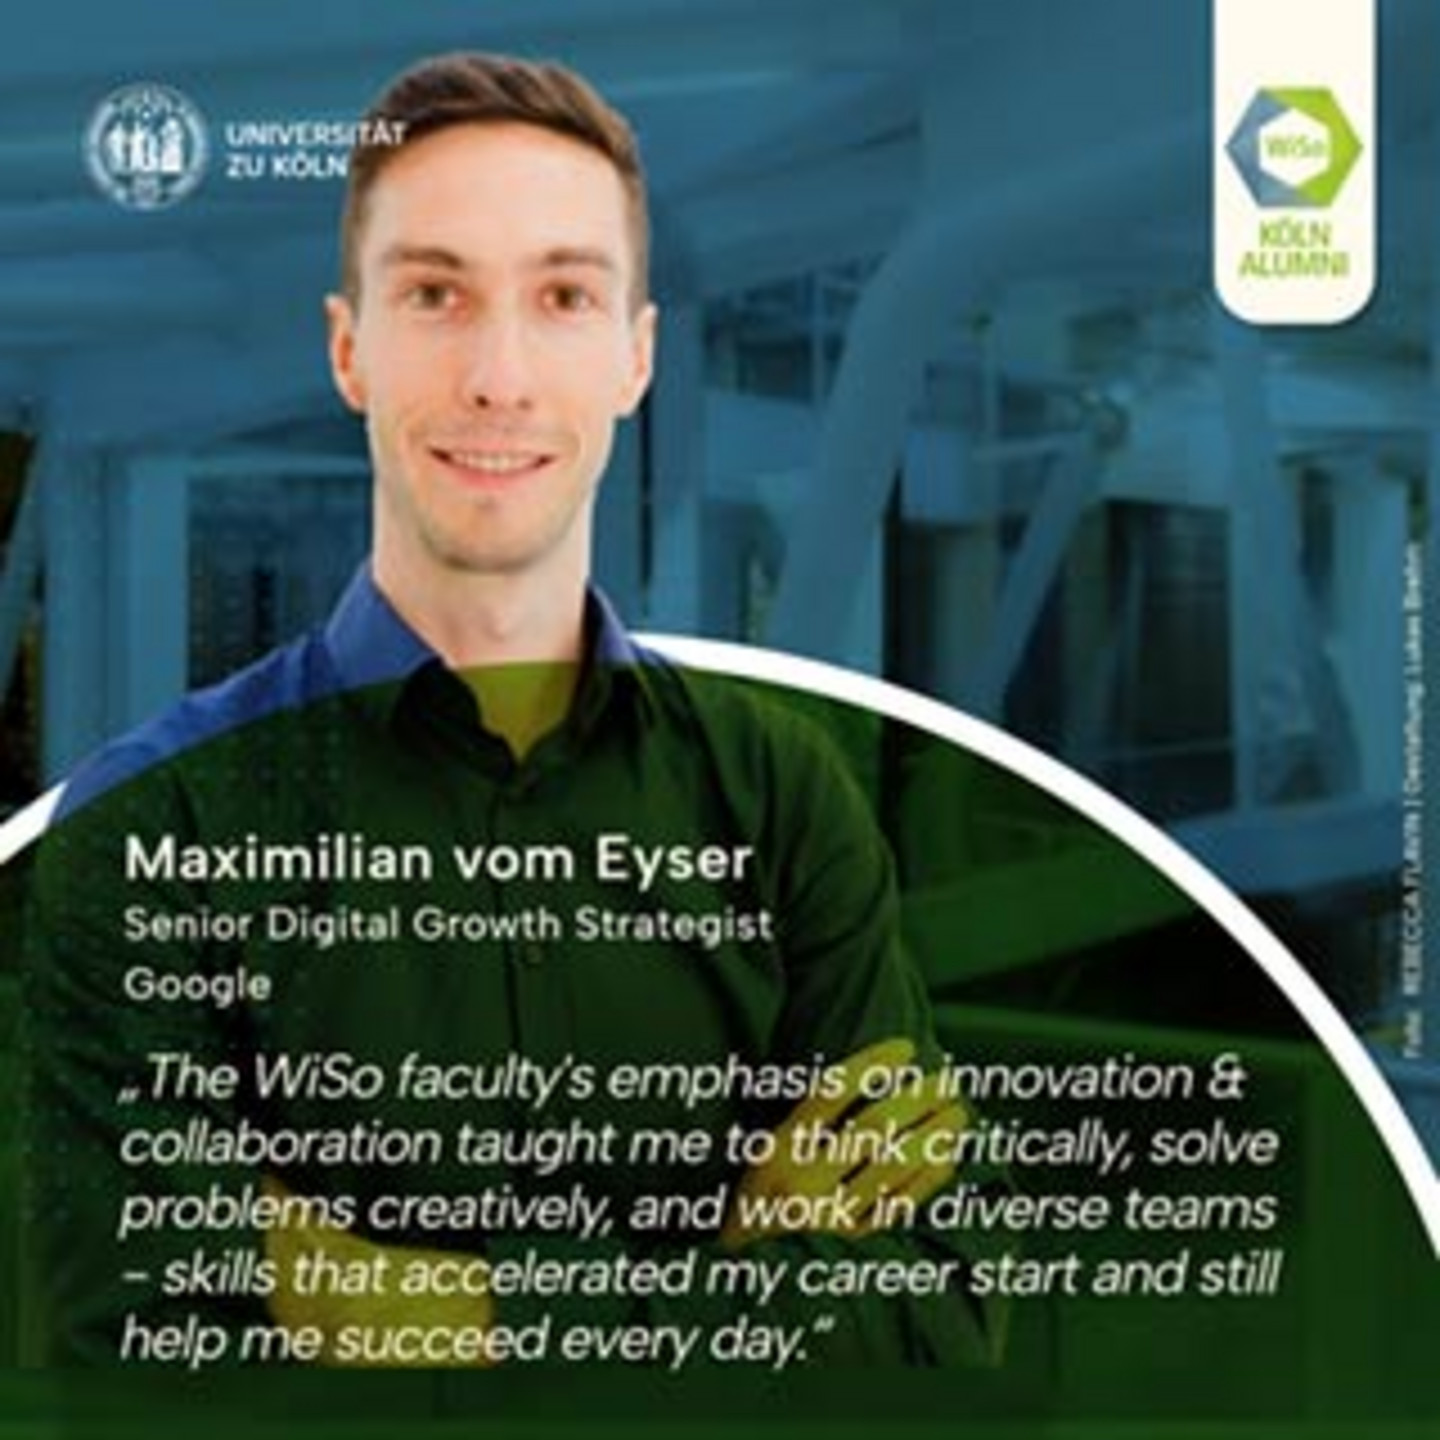 Maximilian vom Eyser, Senior Digital Growth Strategist, Google, standing with crossed arms, smiling into the camera. Text: "The WiSo faculty's emphasis on innovation & collaboration taught me to think critically, solve problems creatively, and work in diverse teams - skills that accelerated my career start and still help me succeed every day."